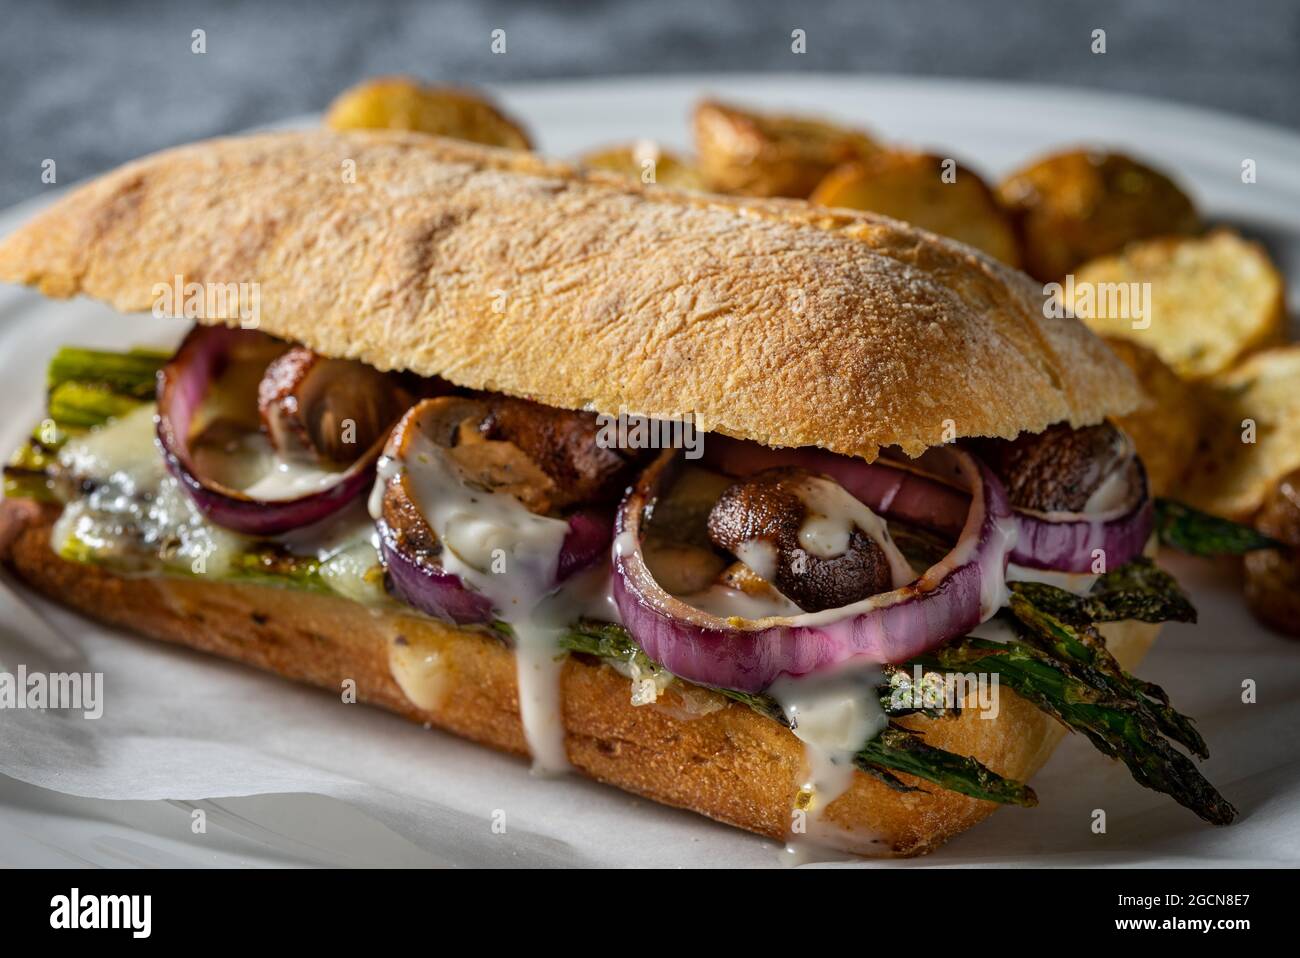 Grilled vegetables on hoagie bread with roasted potatoes. Stock Photo